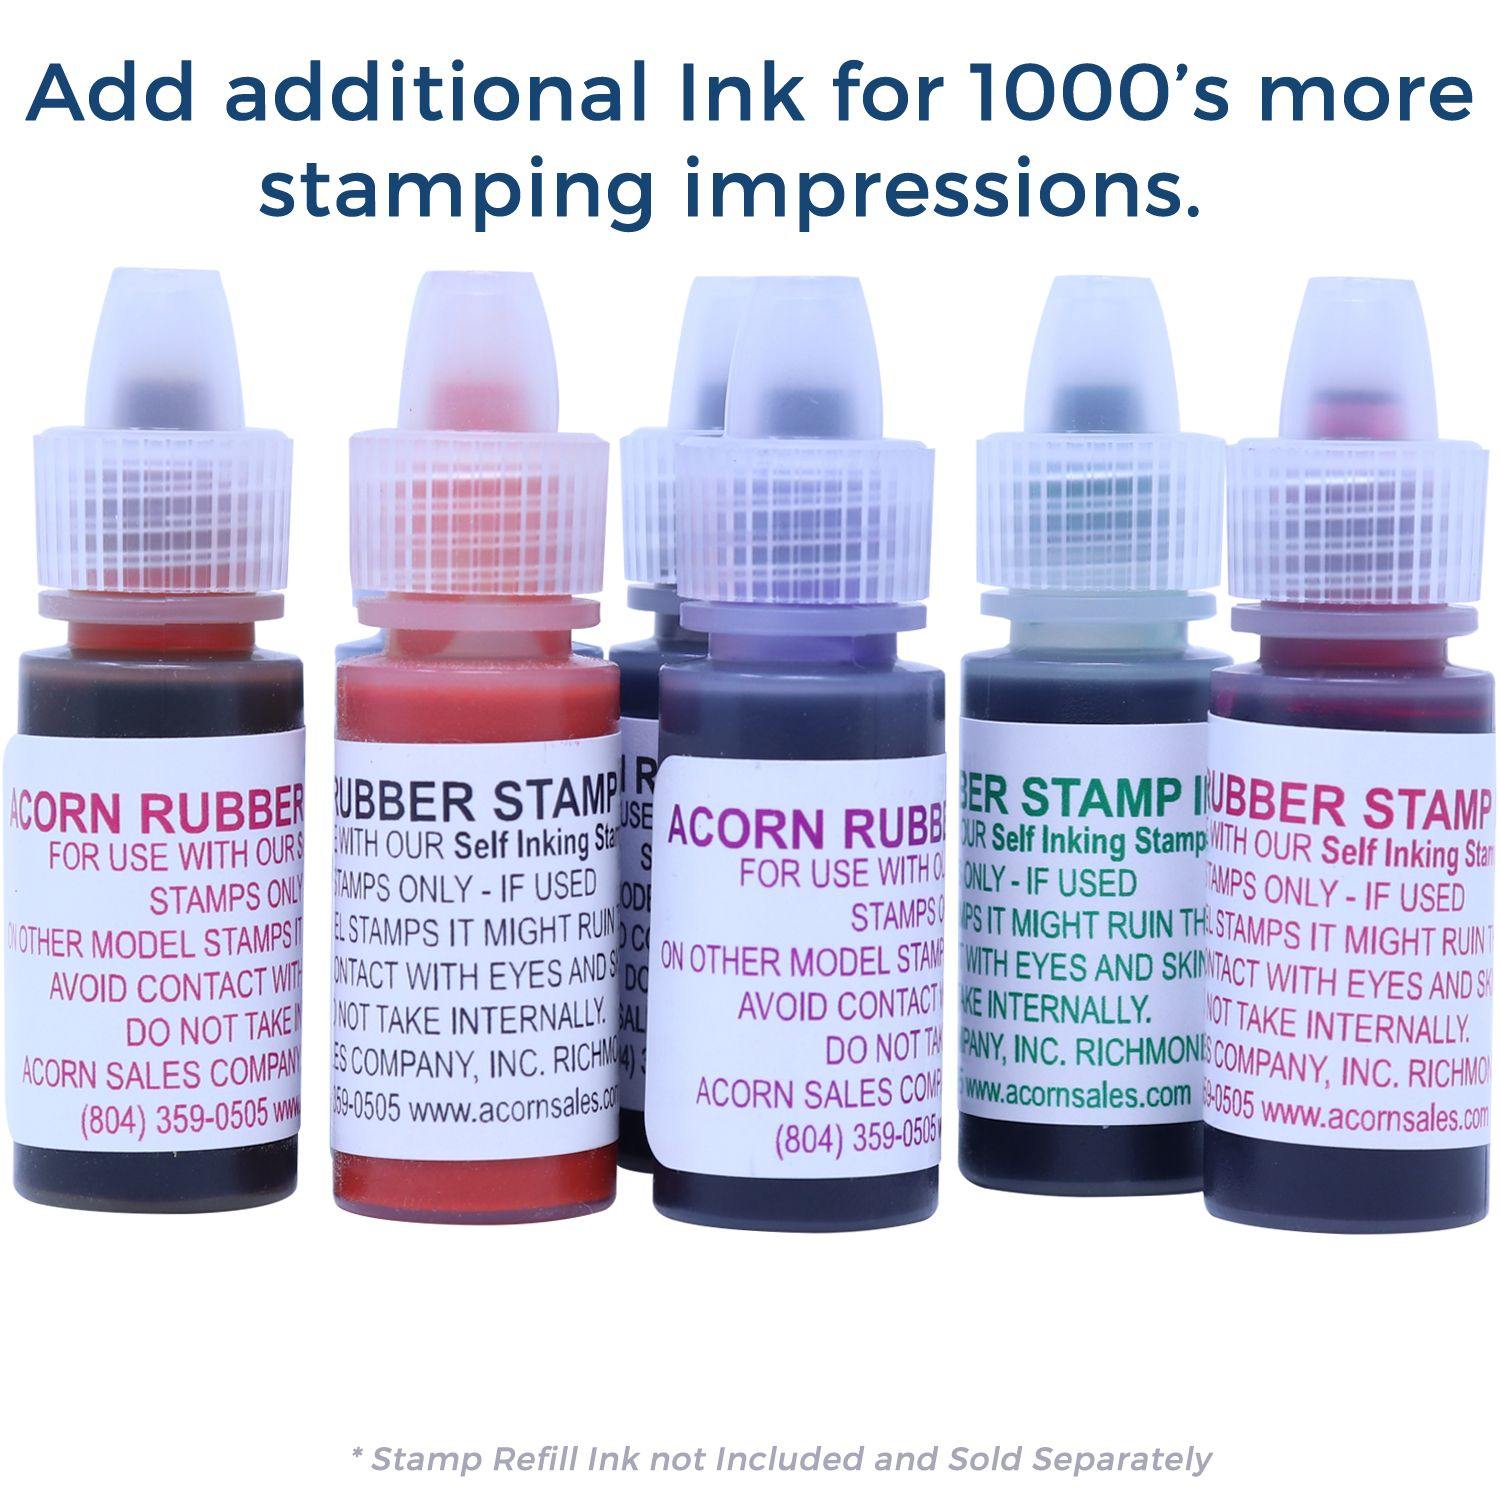 Slim Pre Inked Air Mail Stamp - Engineer Seal Stamps - Brand_Slim, Impression Size_Small, Stamp Type_Pre-Inked Stamp, Type of Use_Postal & Mailing, Type of Use_Shipping & Receiving